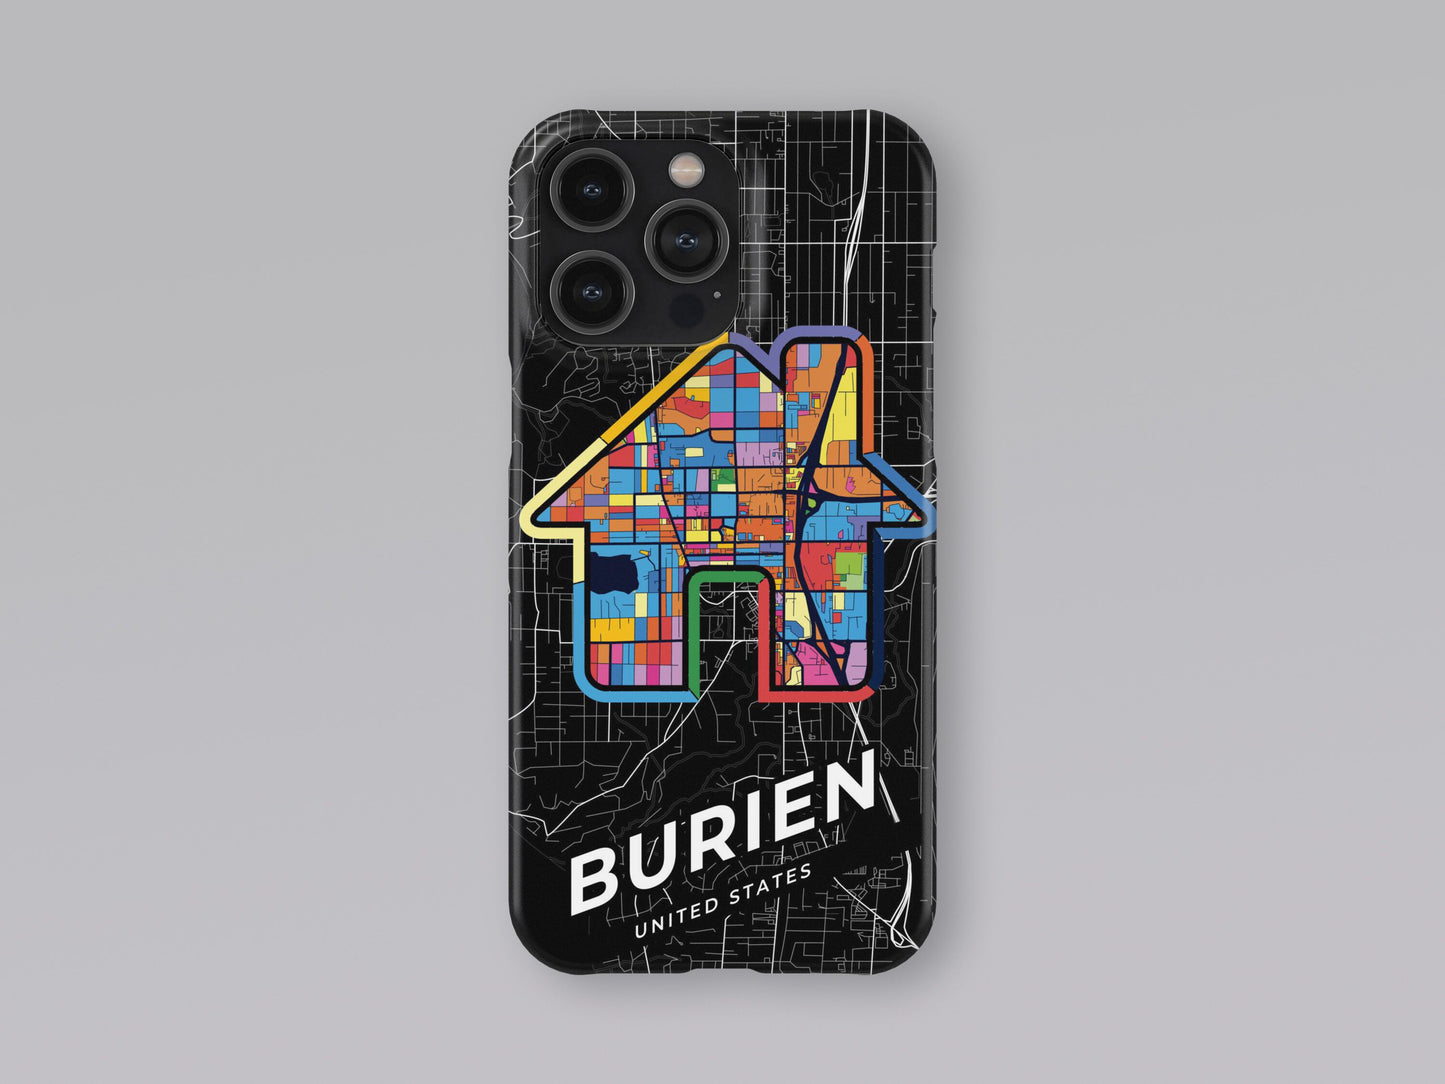 Burien Washington slim phone case with colorful icon. Birthday, wedding or housewarming gift. Couple match cases. 3